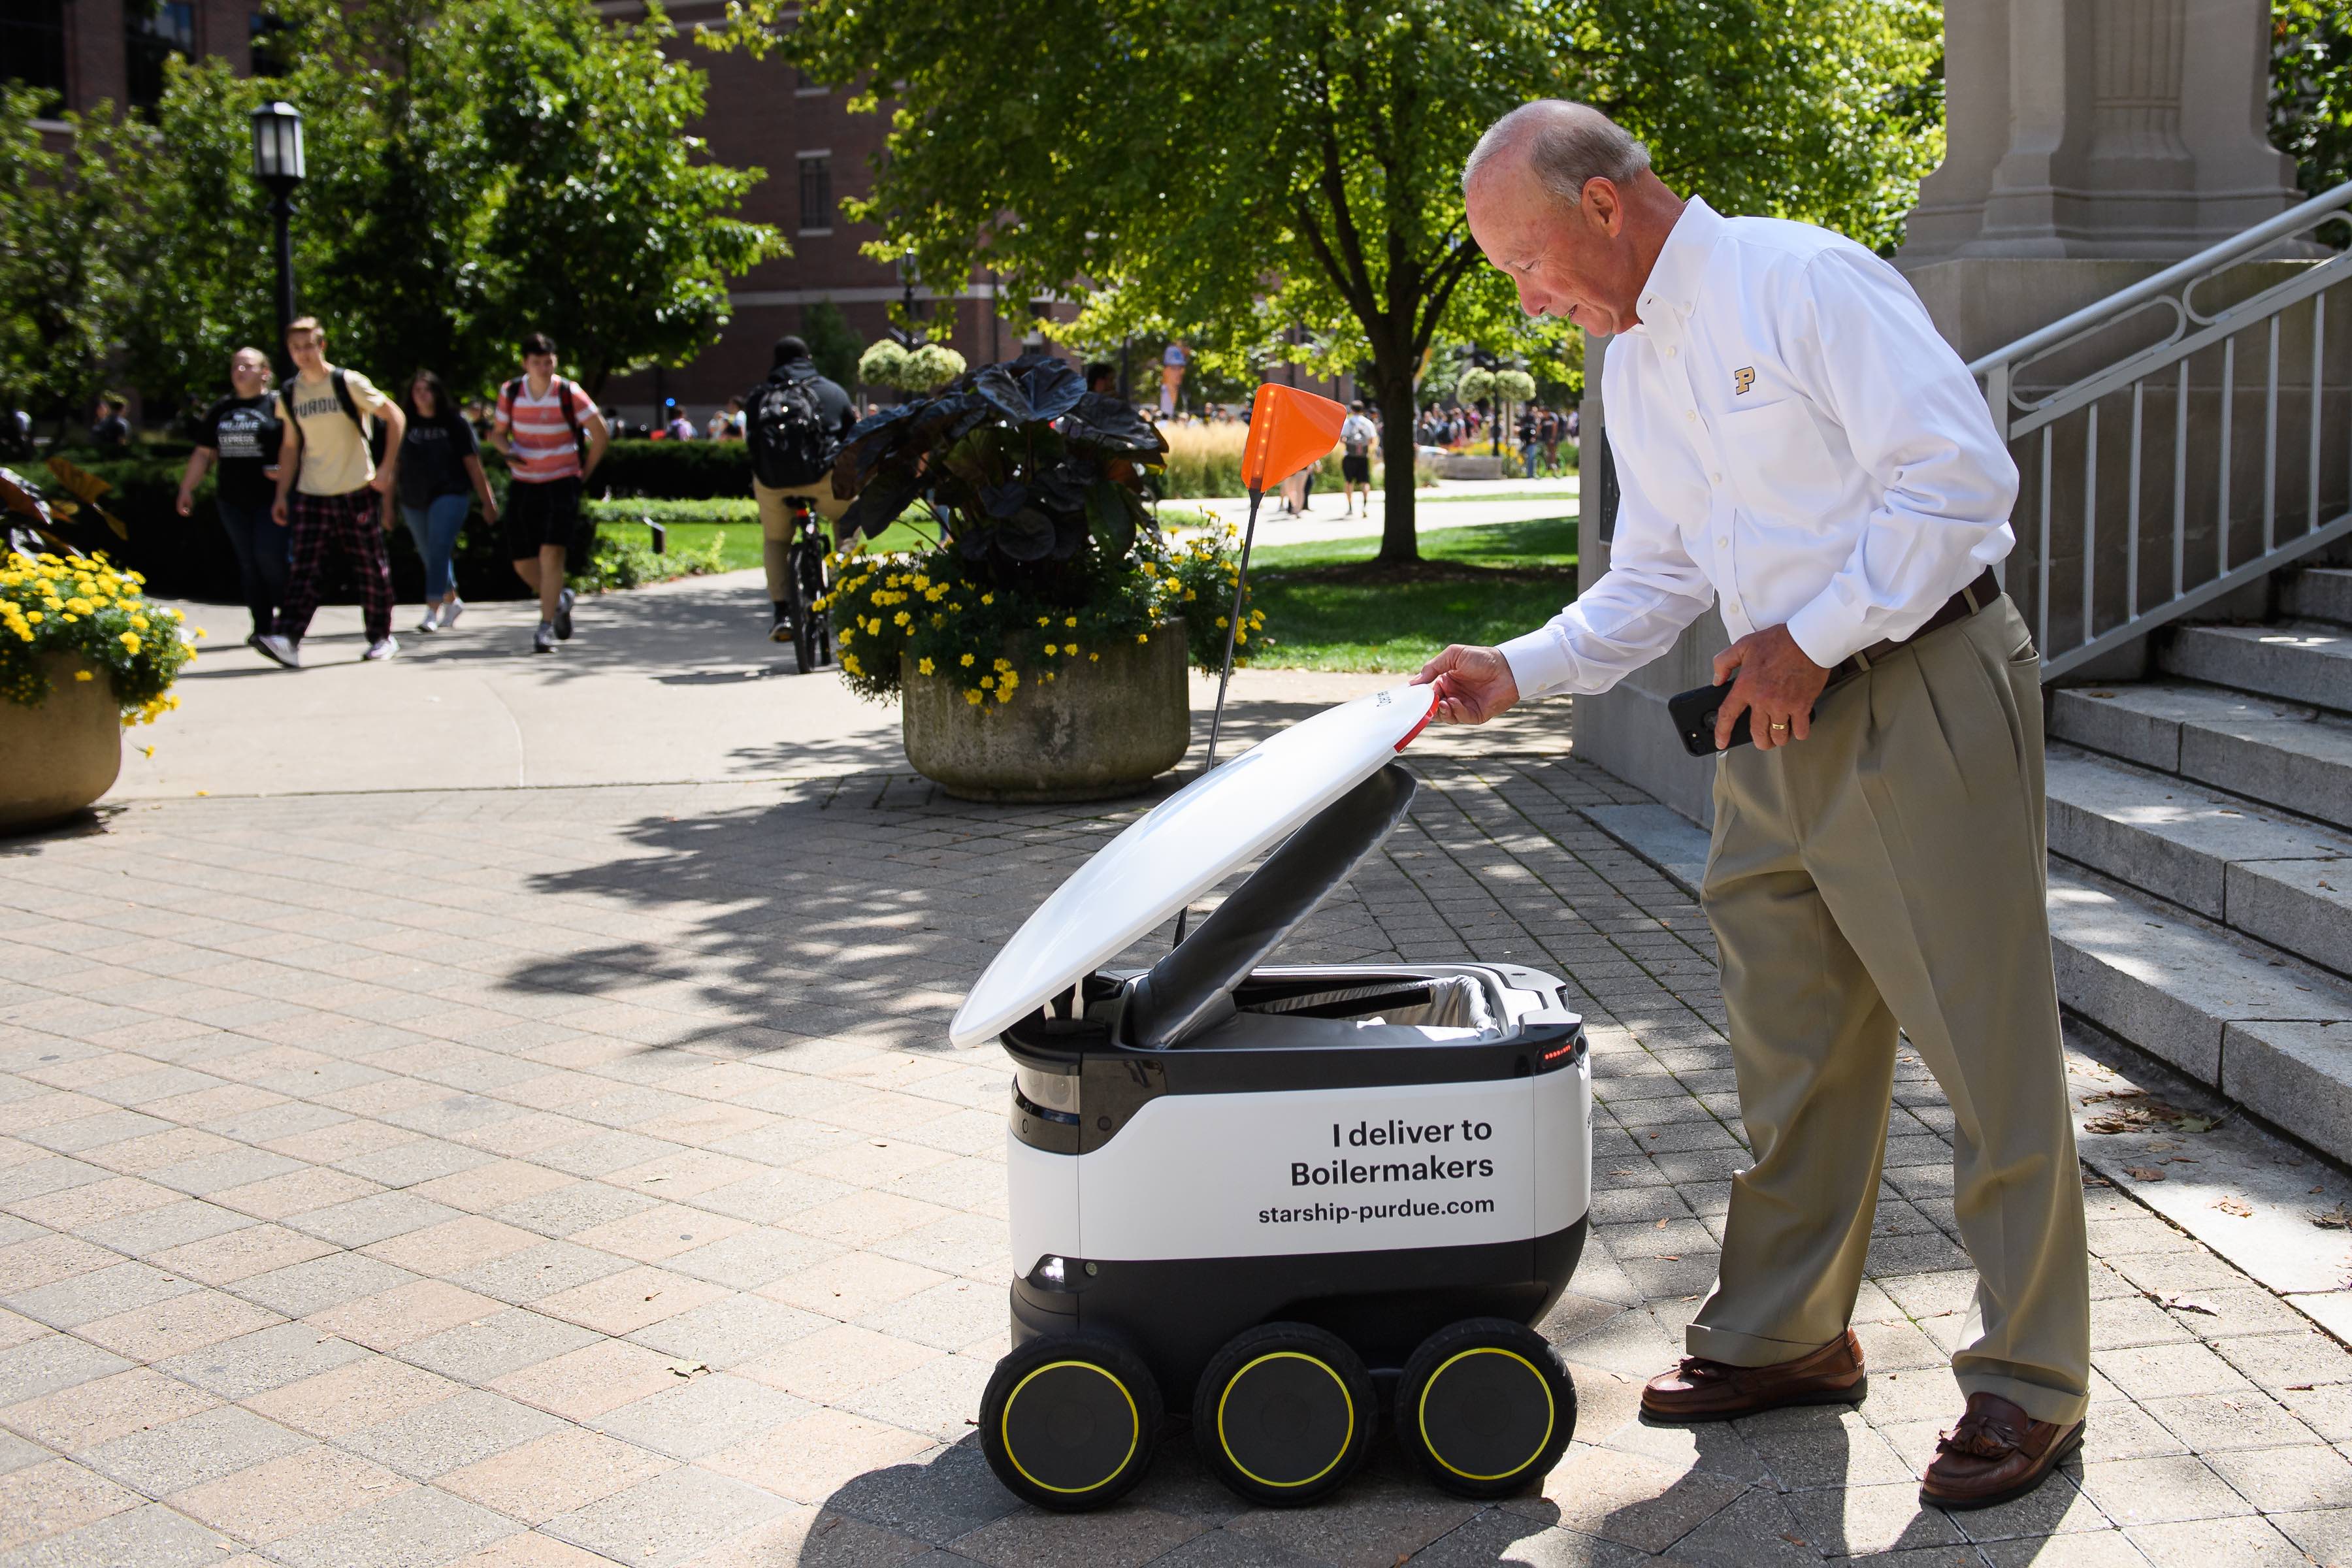 Purdue President Mitch Daniels greets a Starship delivery robot